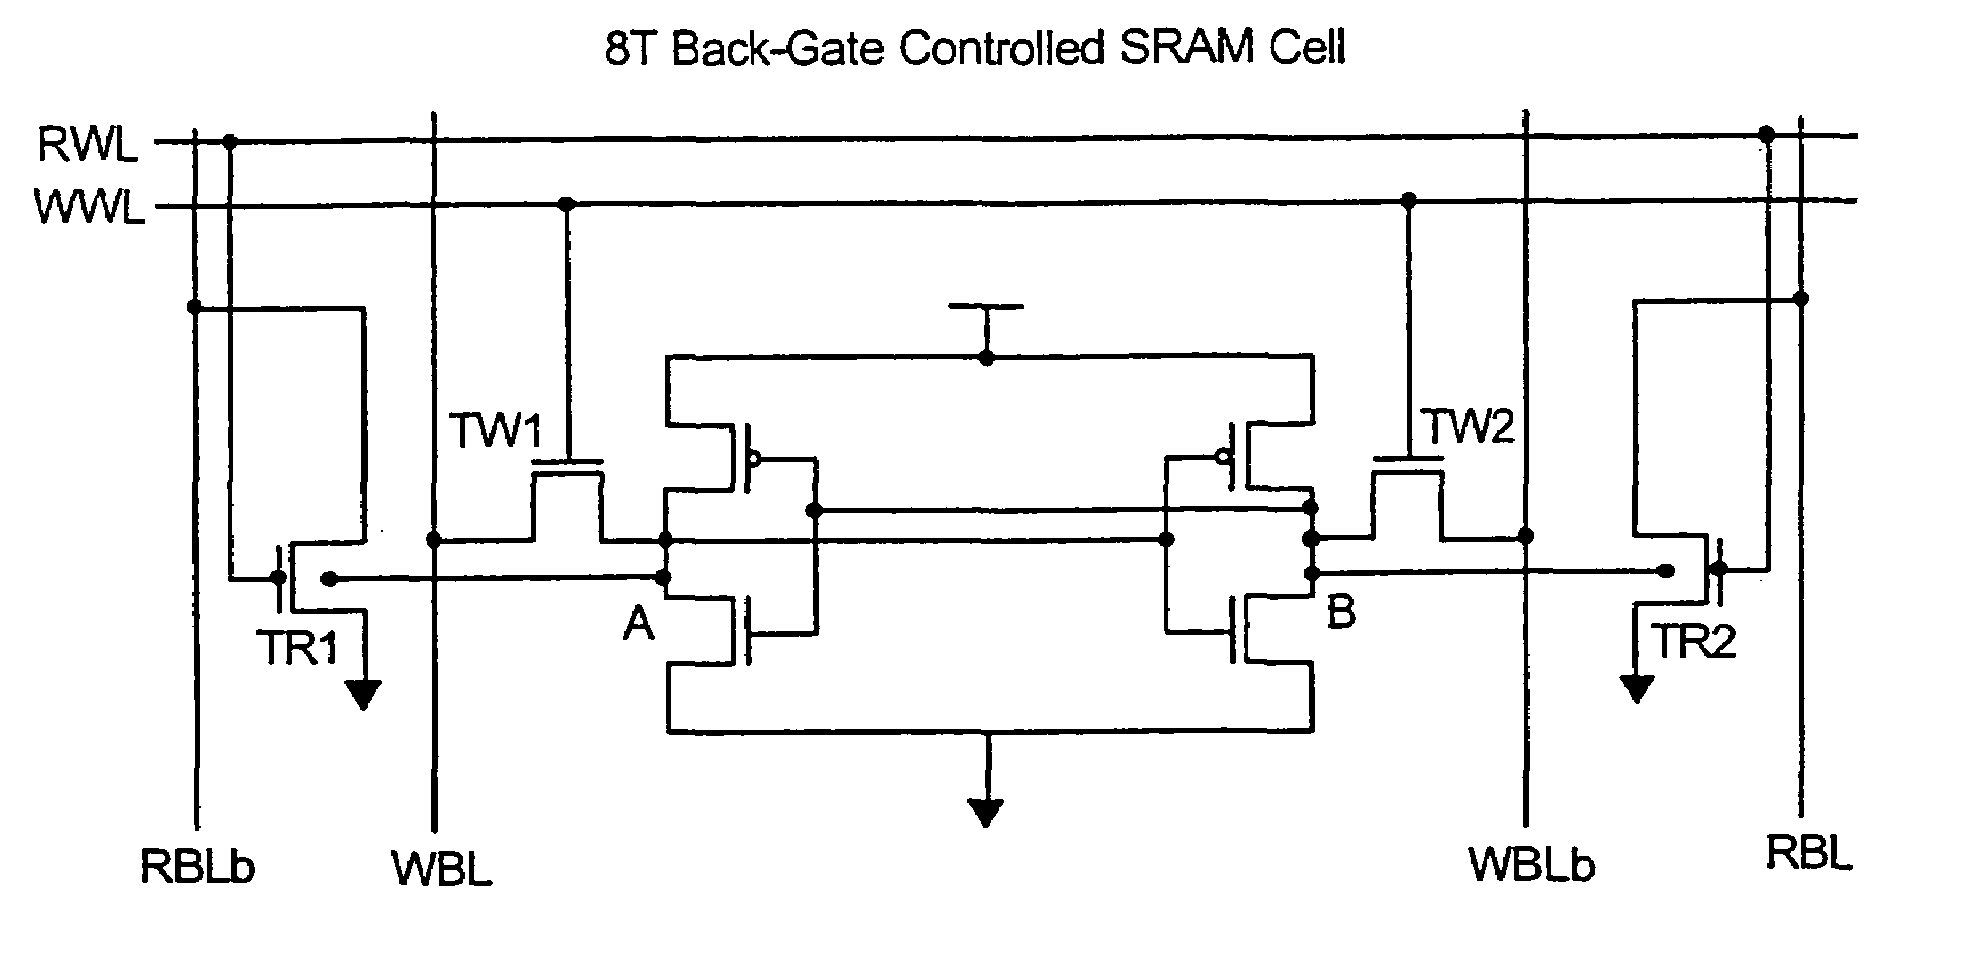 Back-gate controlled read SRAM cell